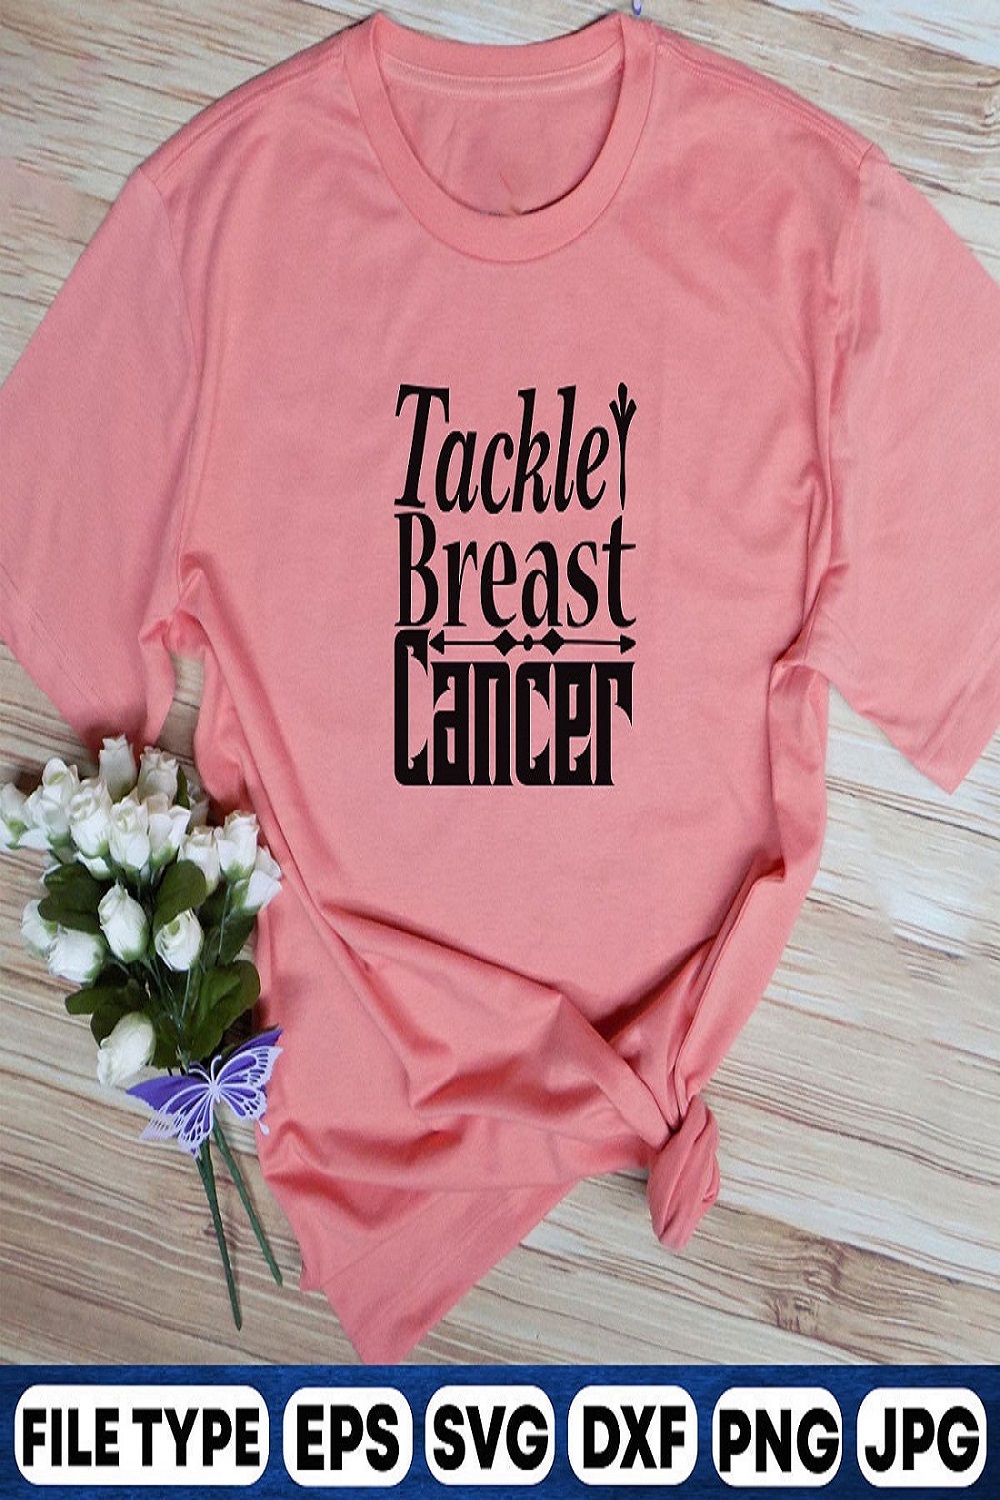 Tackle breast cancer pinterest preview image.